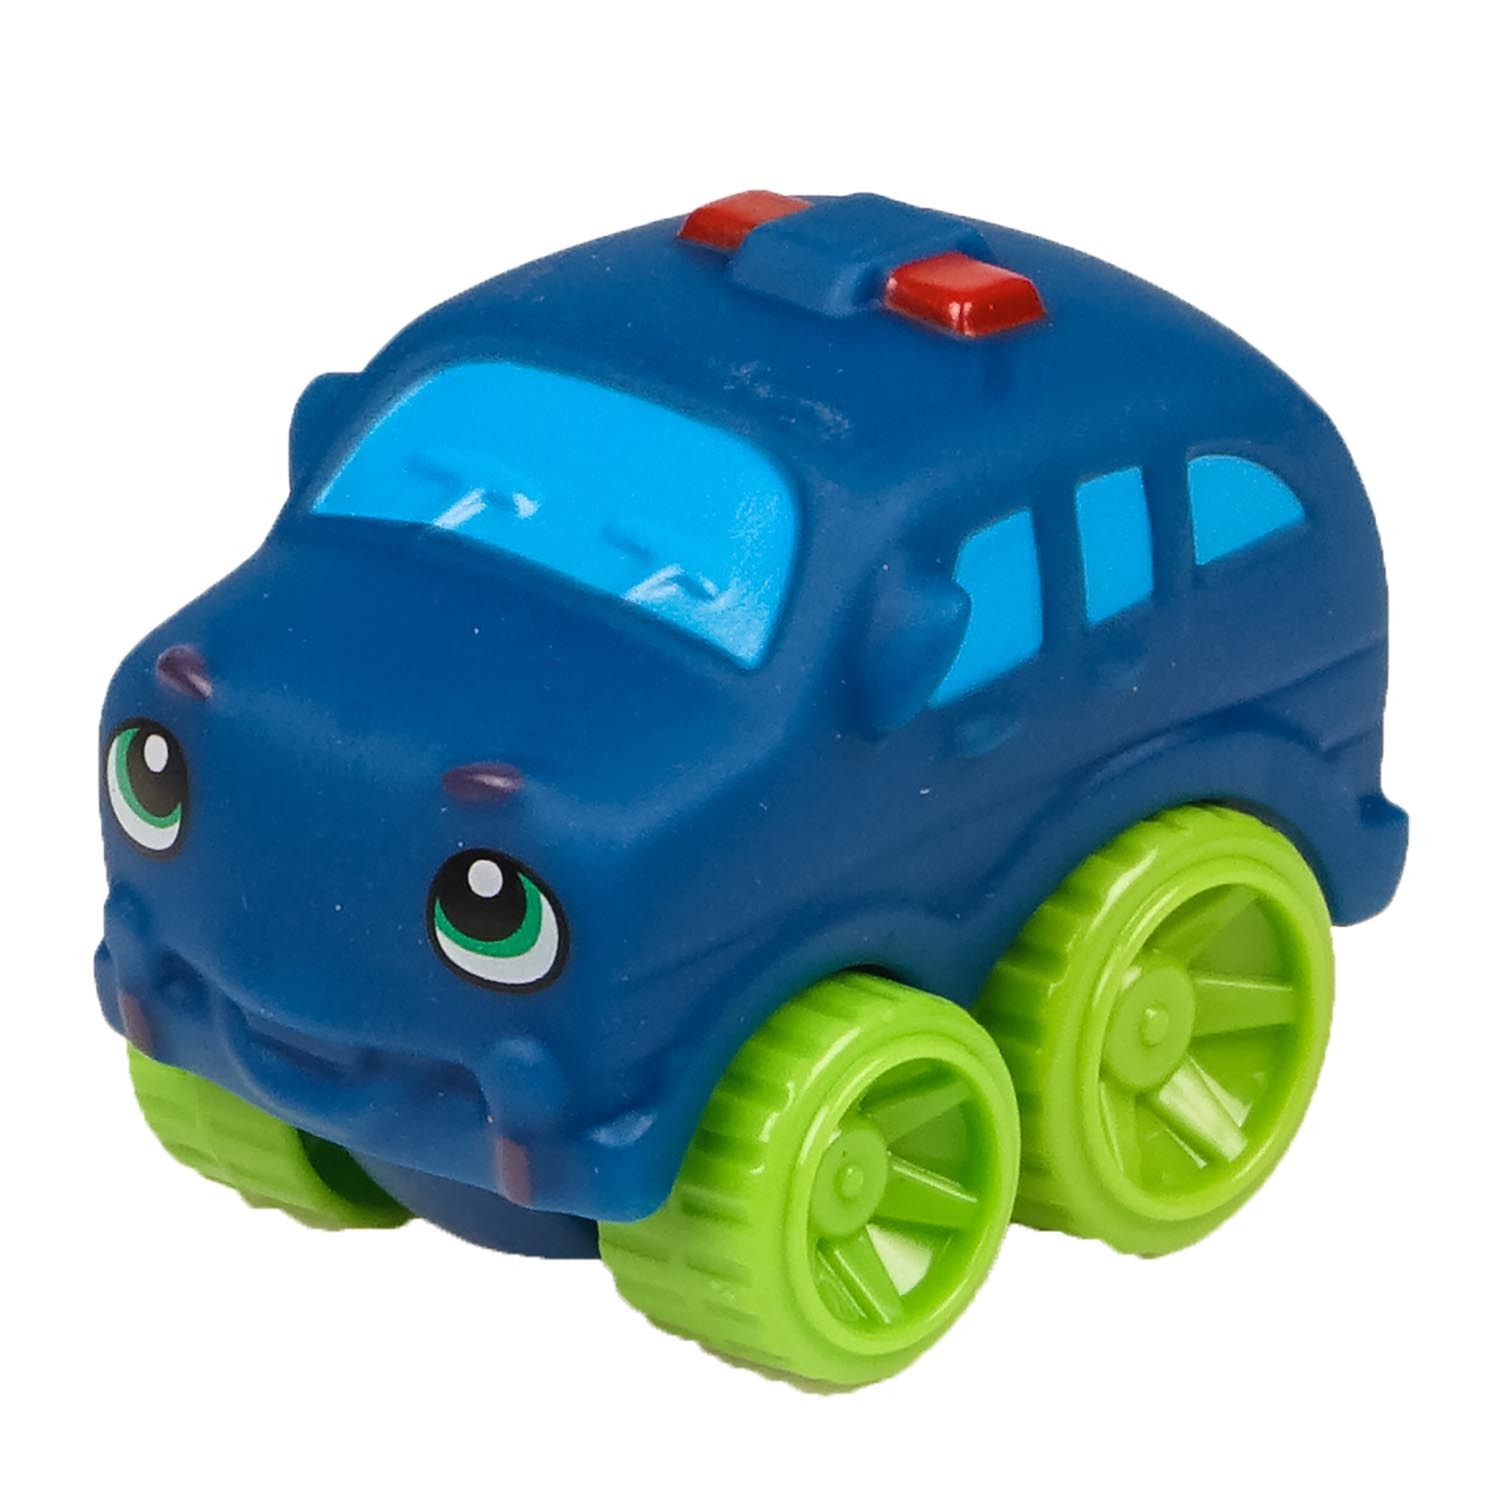 Cute Vehicle Toy 5 Pack in Assorted styles Image 2